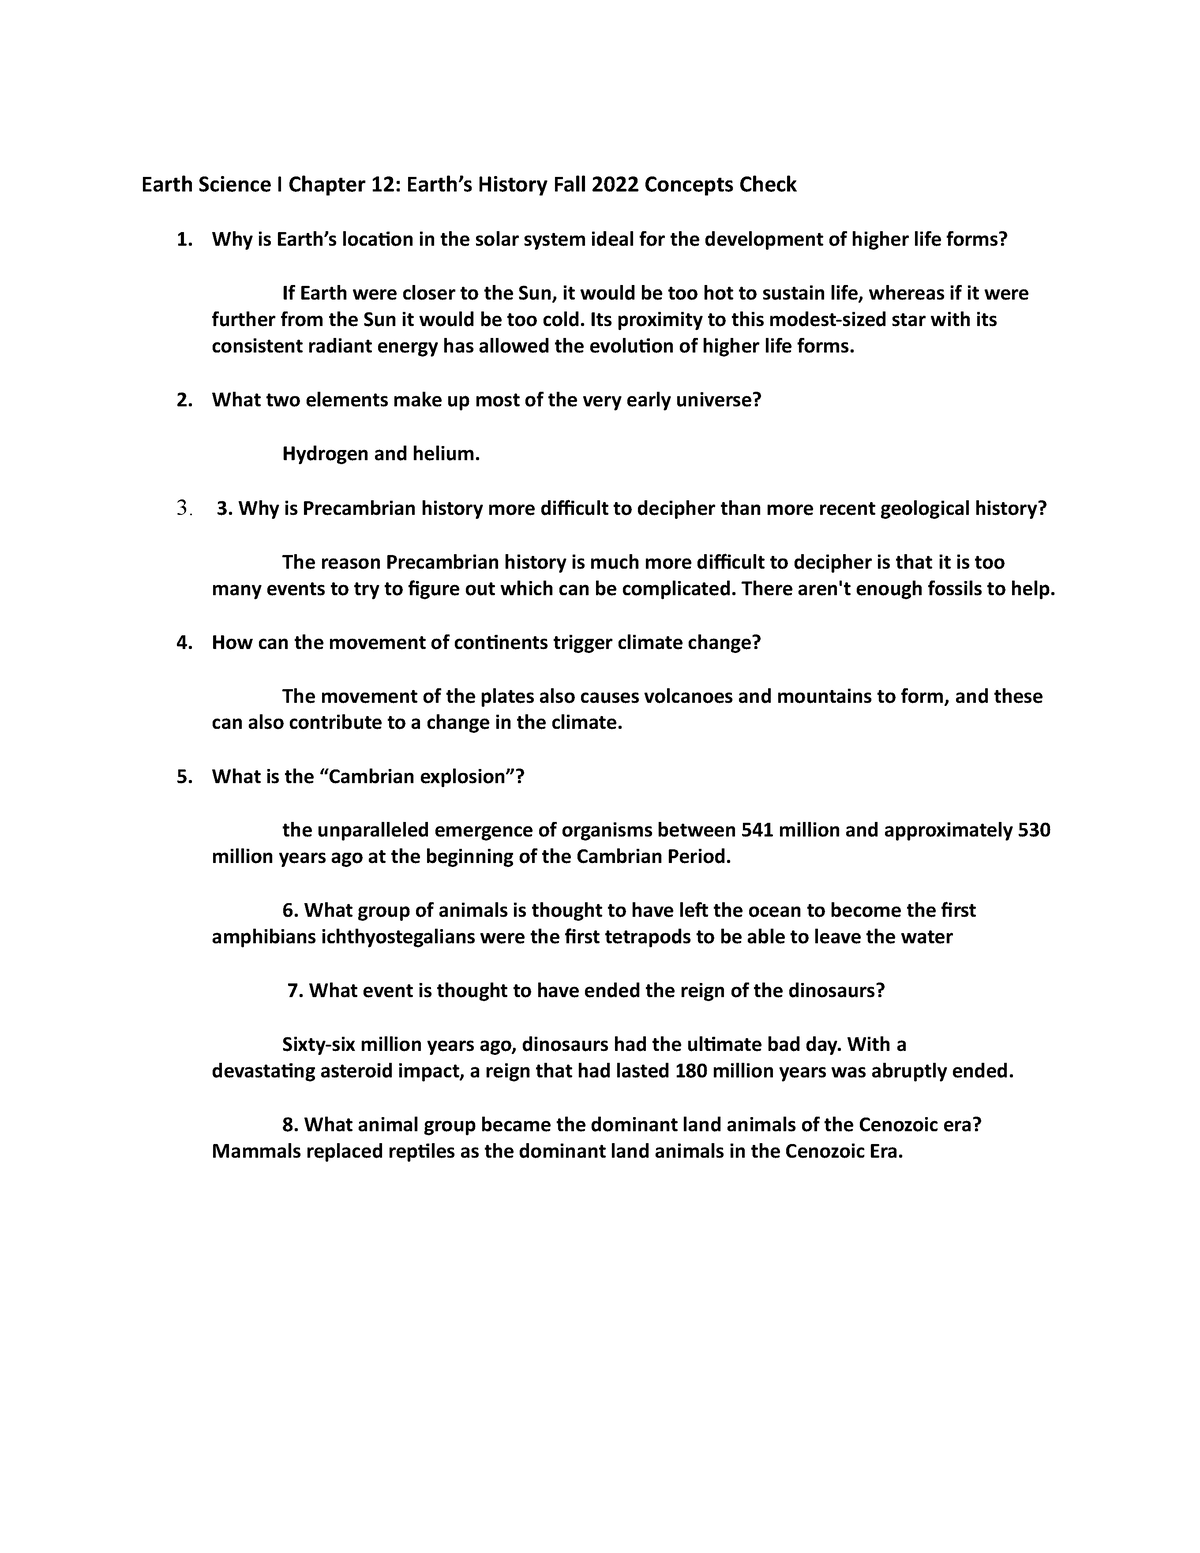 assignment chapter 12 concept check quiz